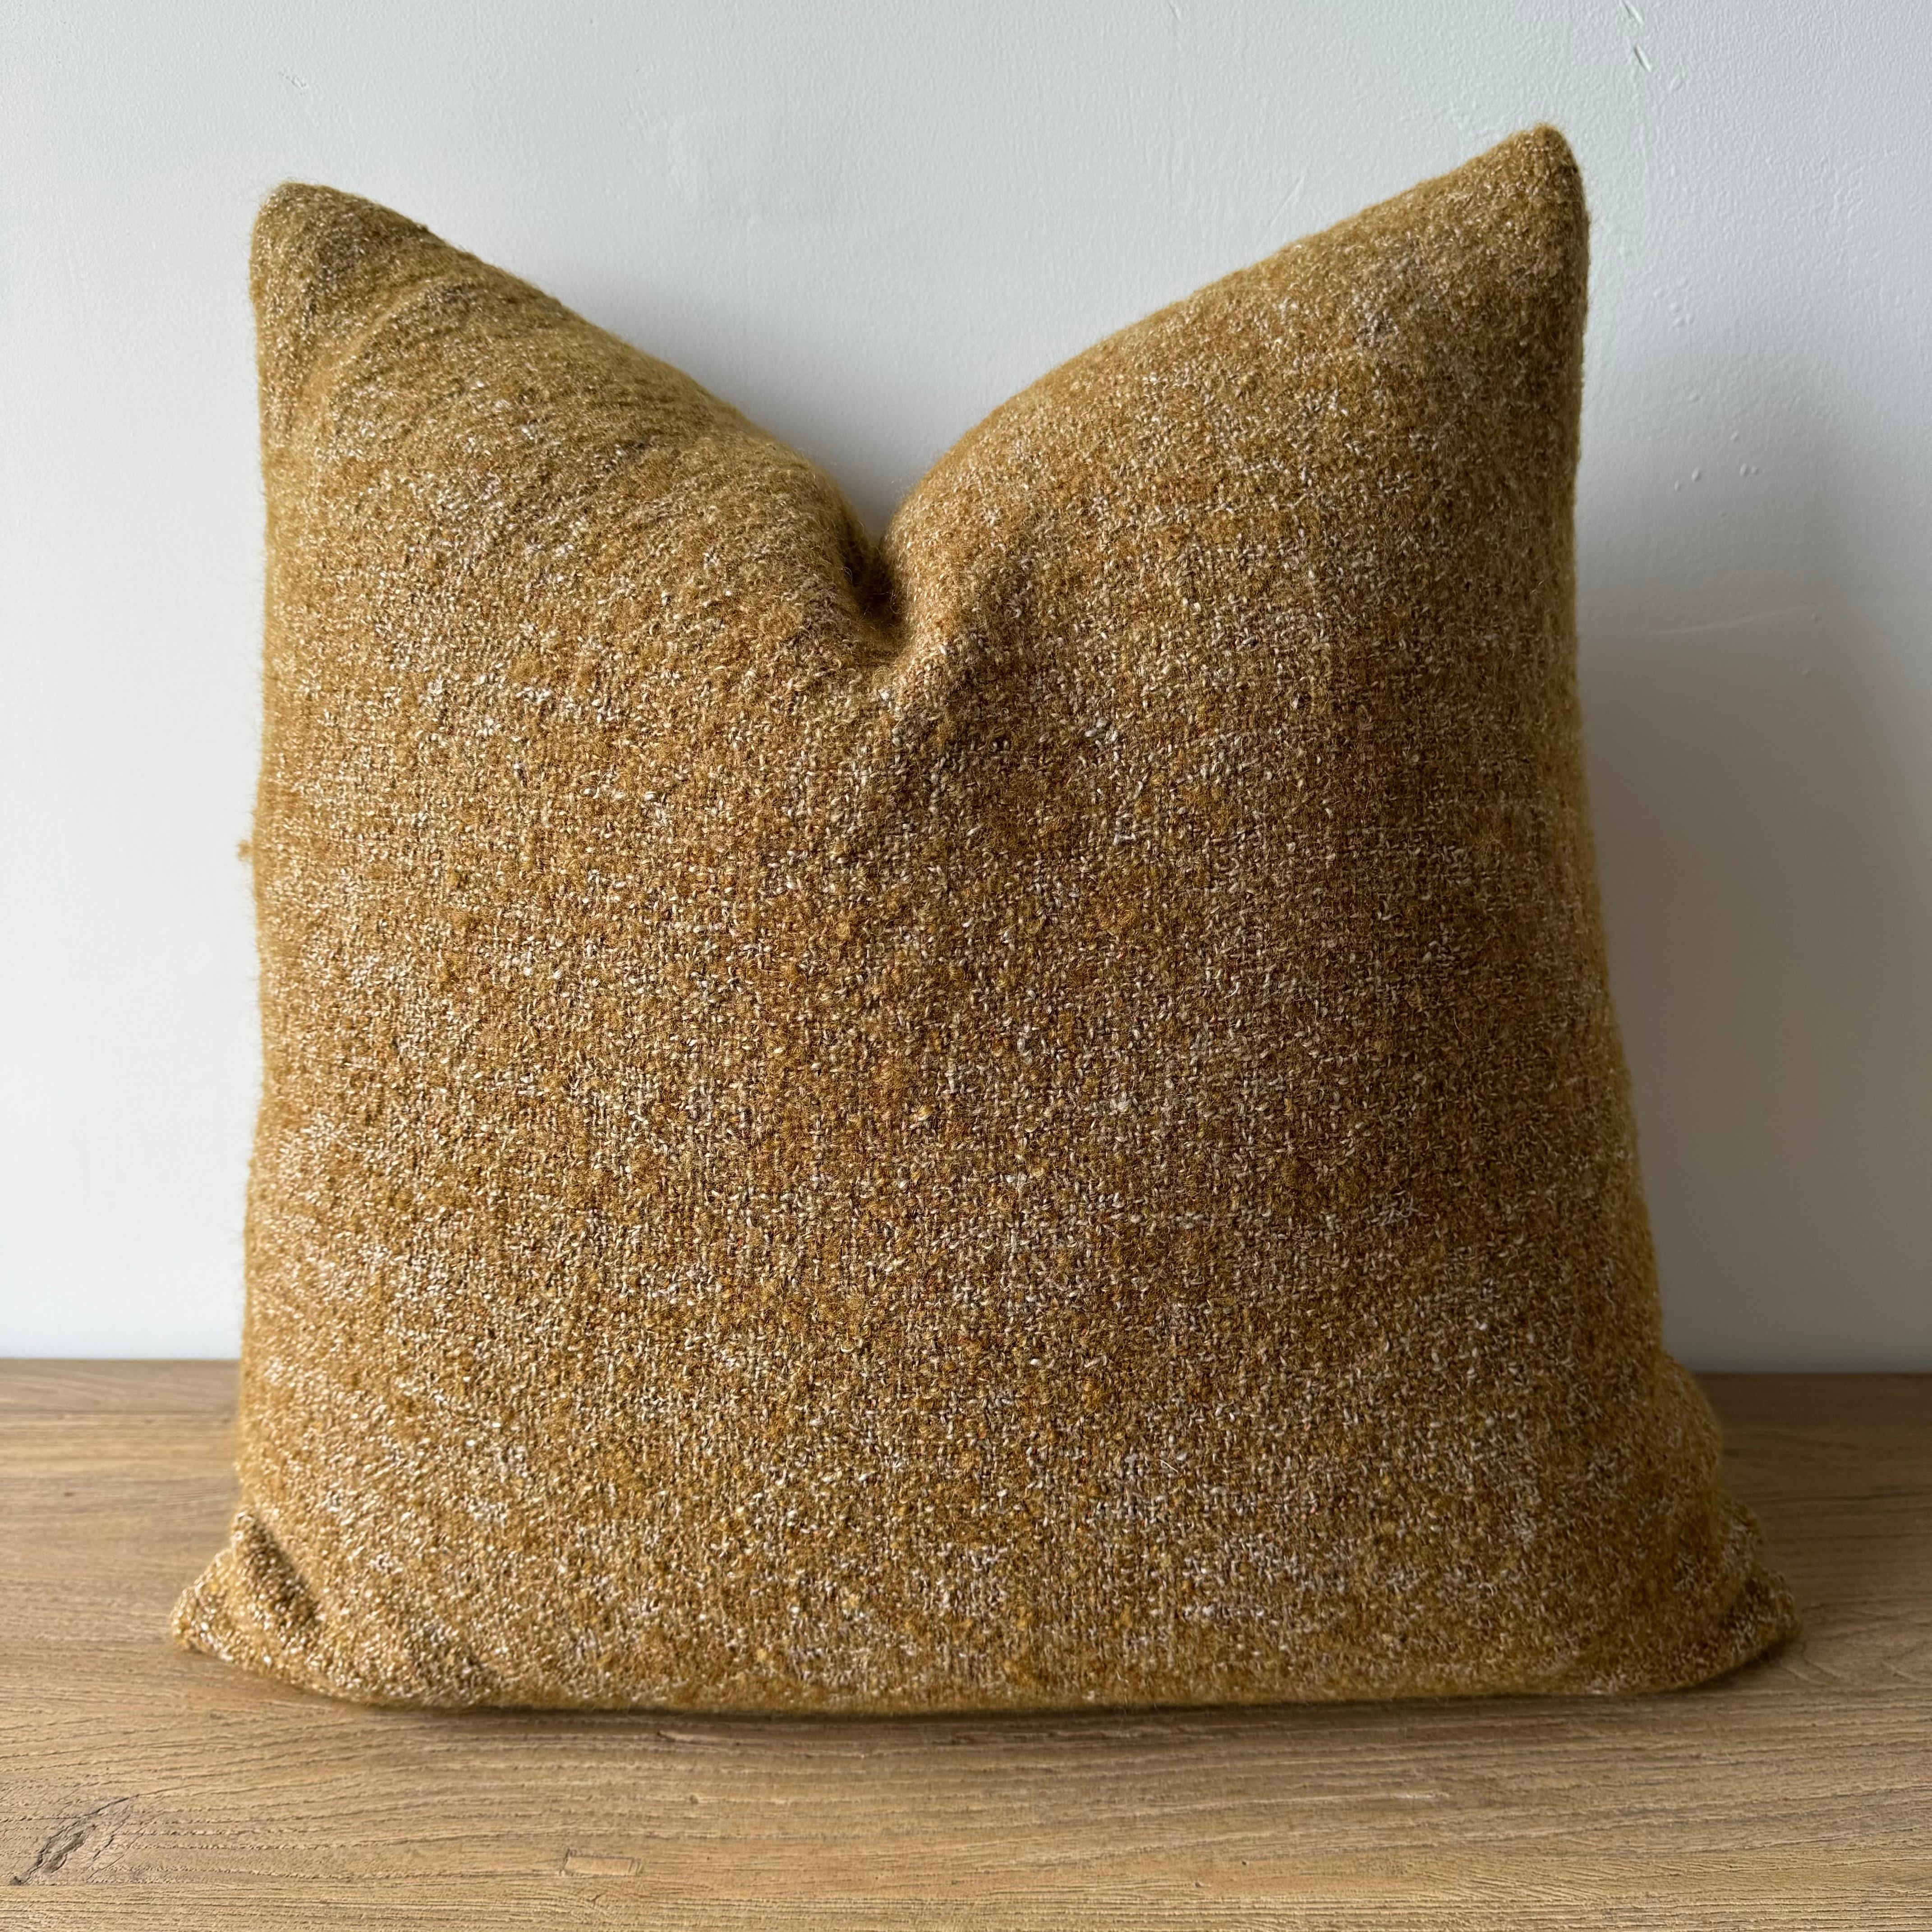 A rich dijon mustard, with hints of rust and natural flax oatmeal woven fibers in a stonewash finish create this luxurious soft pillow. Sewn with an antique brass zipper closure and overlocked edges.
Includes a down/ feather insert.
Size: 22 x